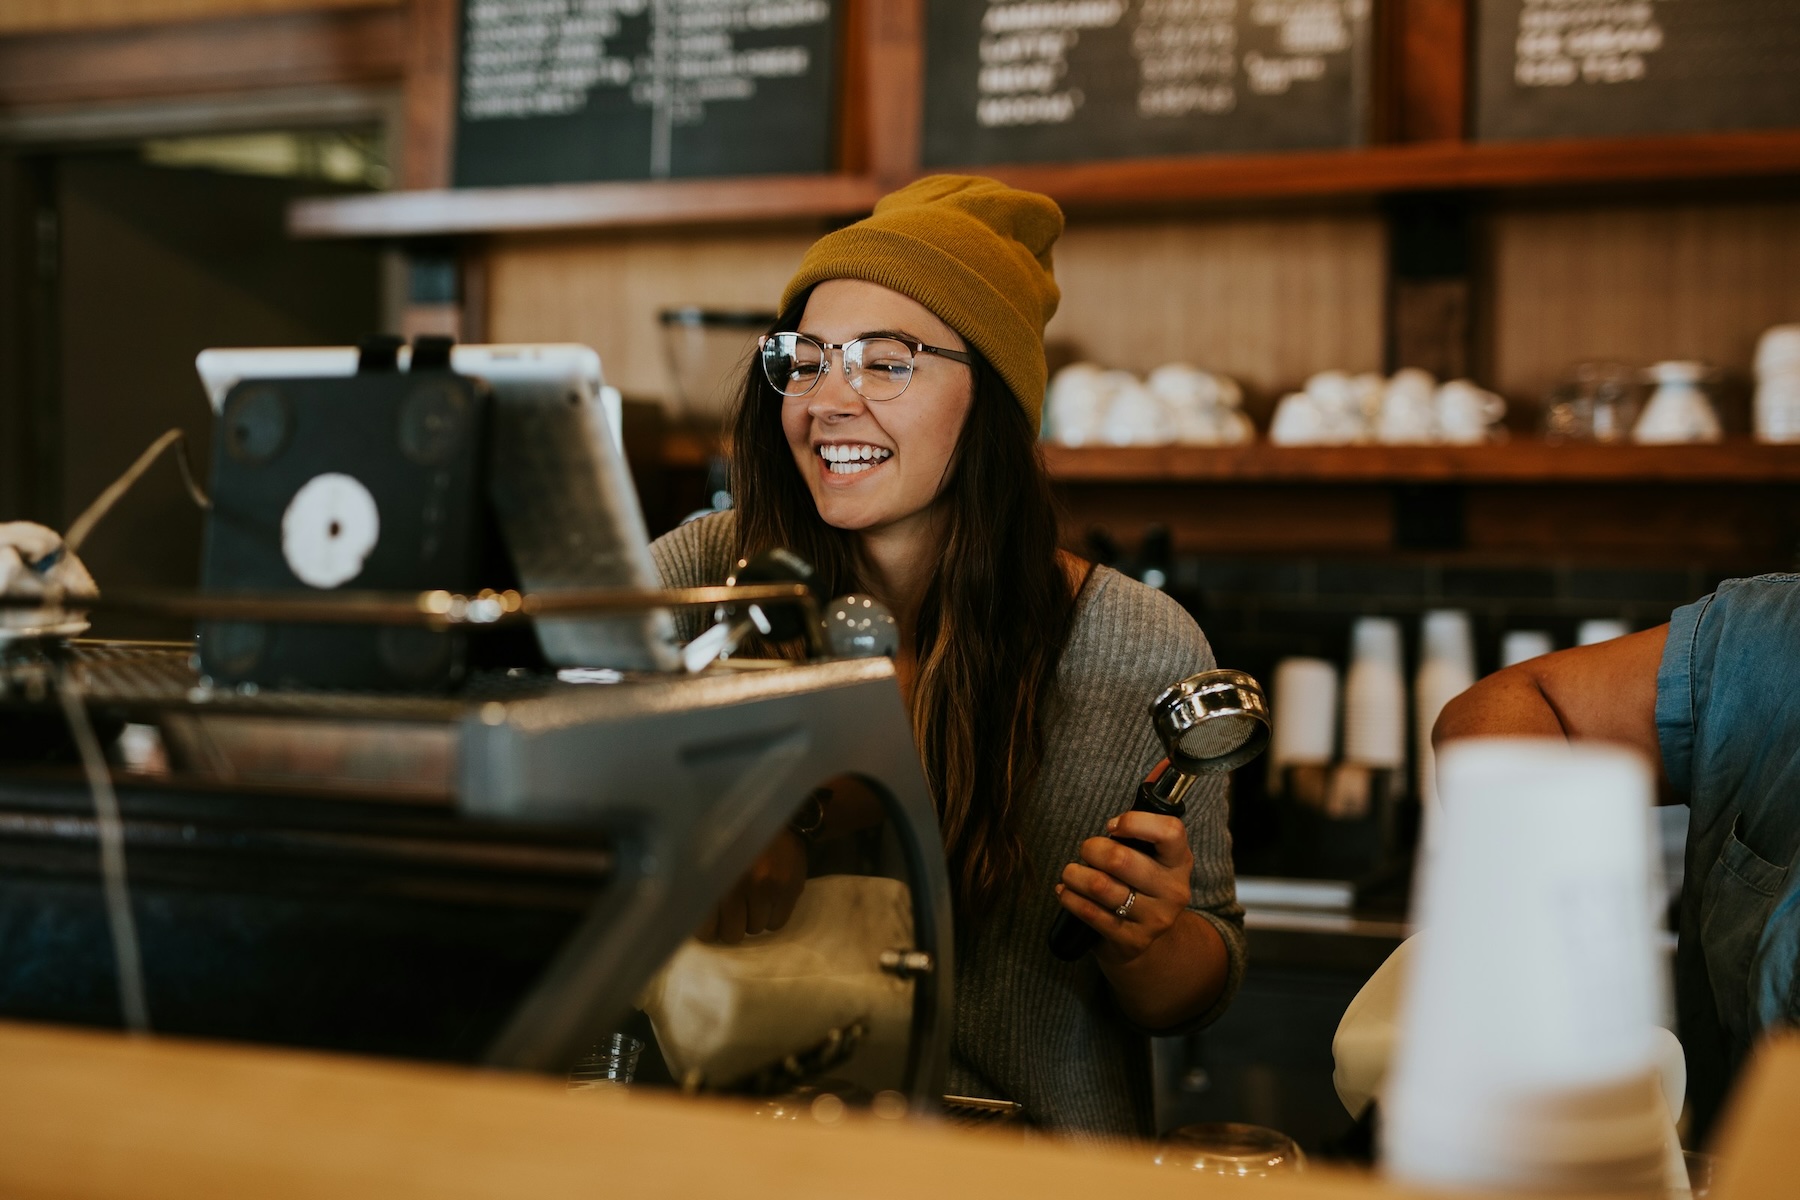 A barista smiles while using the espresso machine to make a drink for a customer